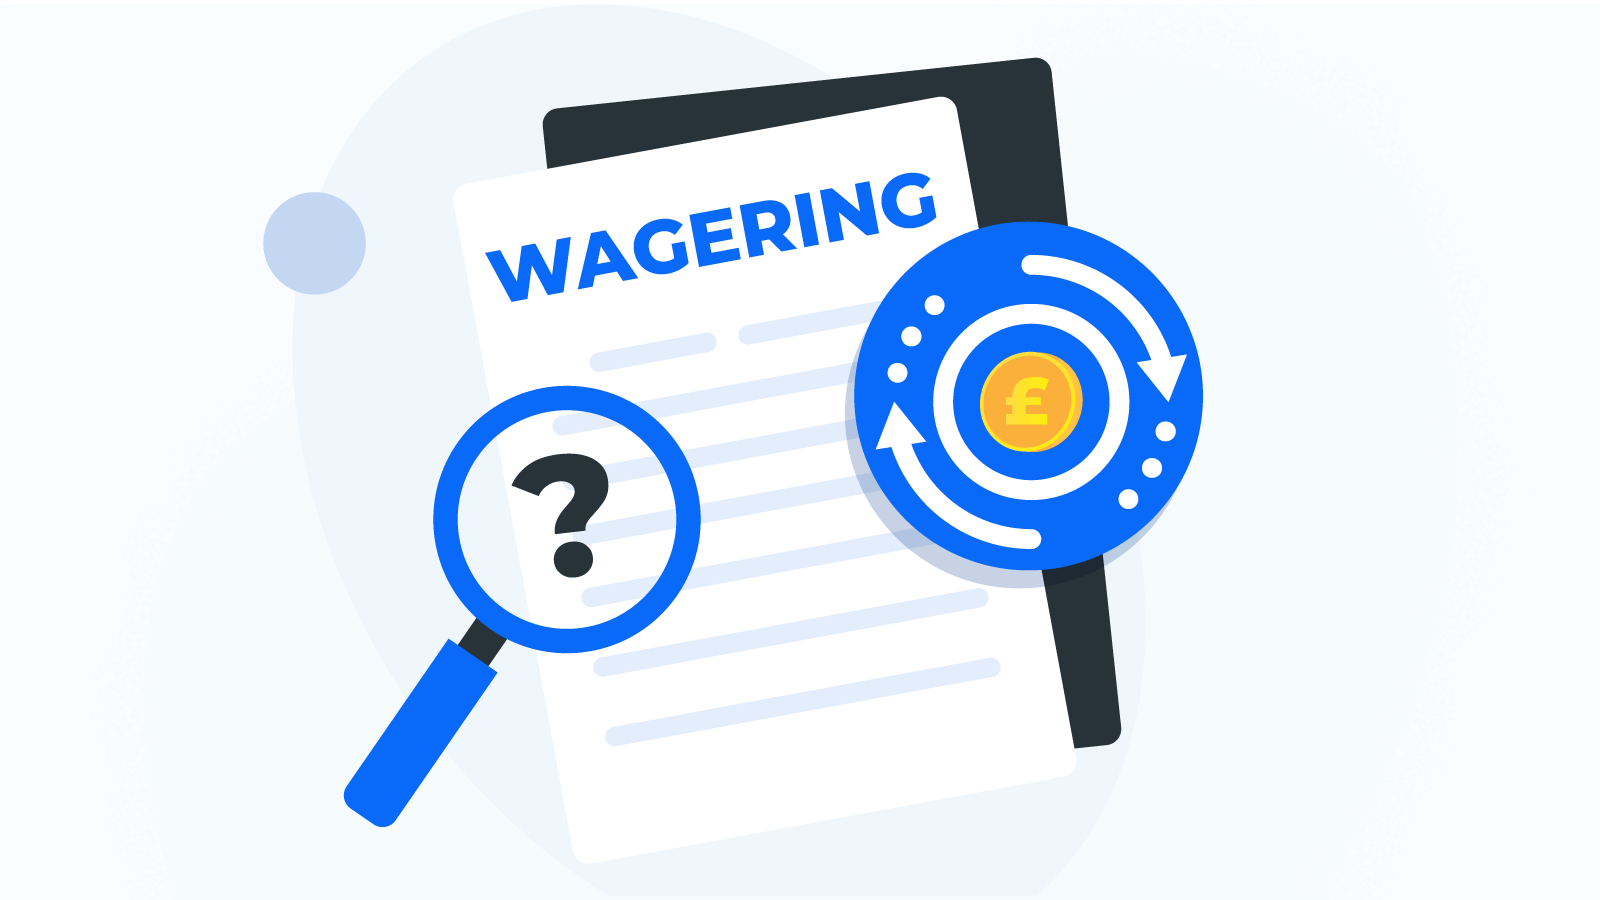 Wagering Complete definition